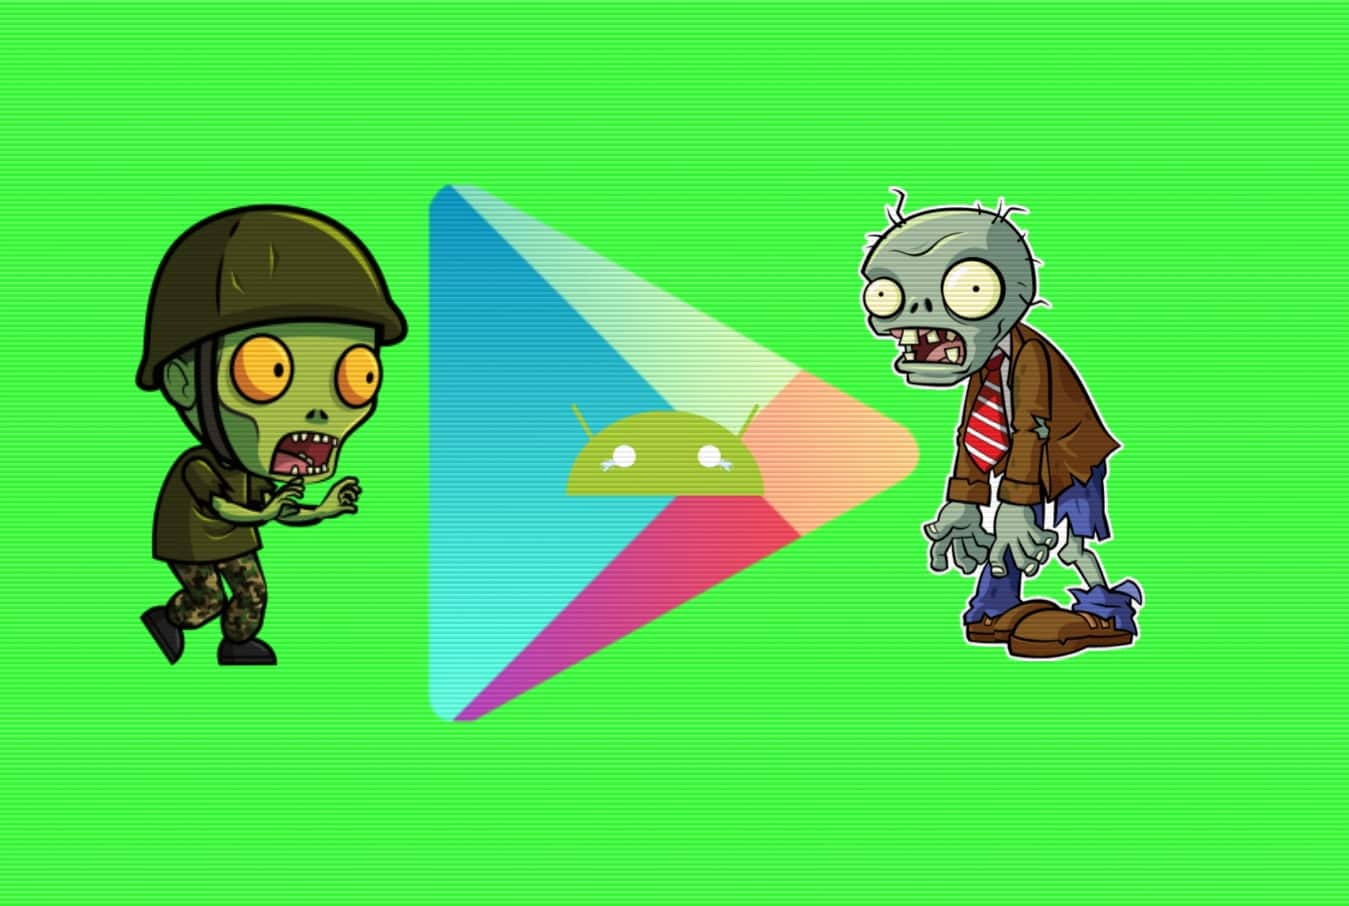 Popular Android Zombie game phish users to steal Gmail credentials